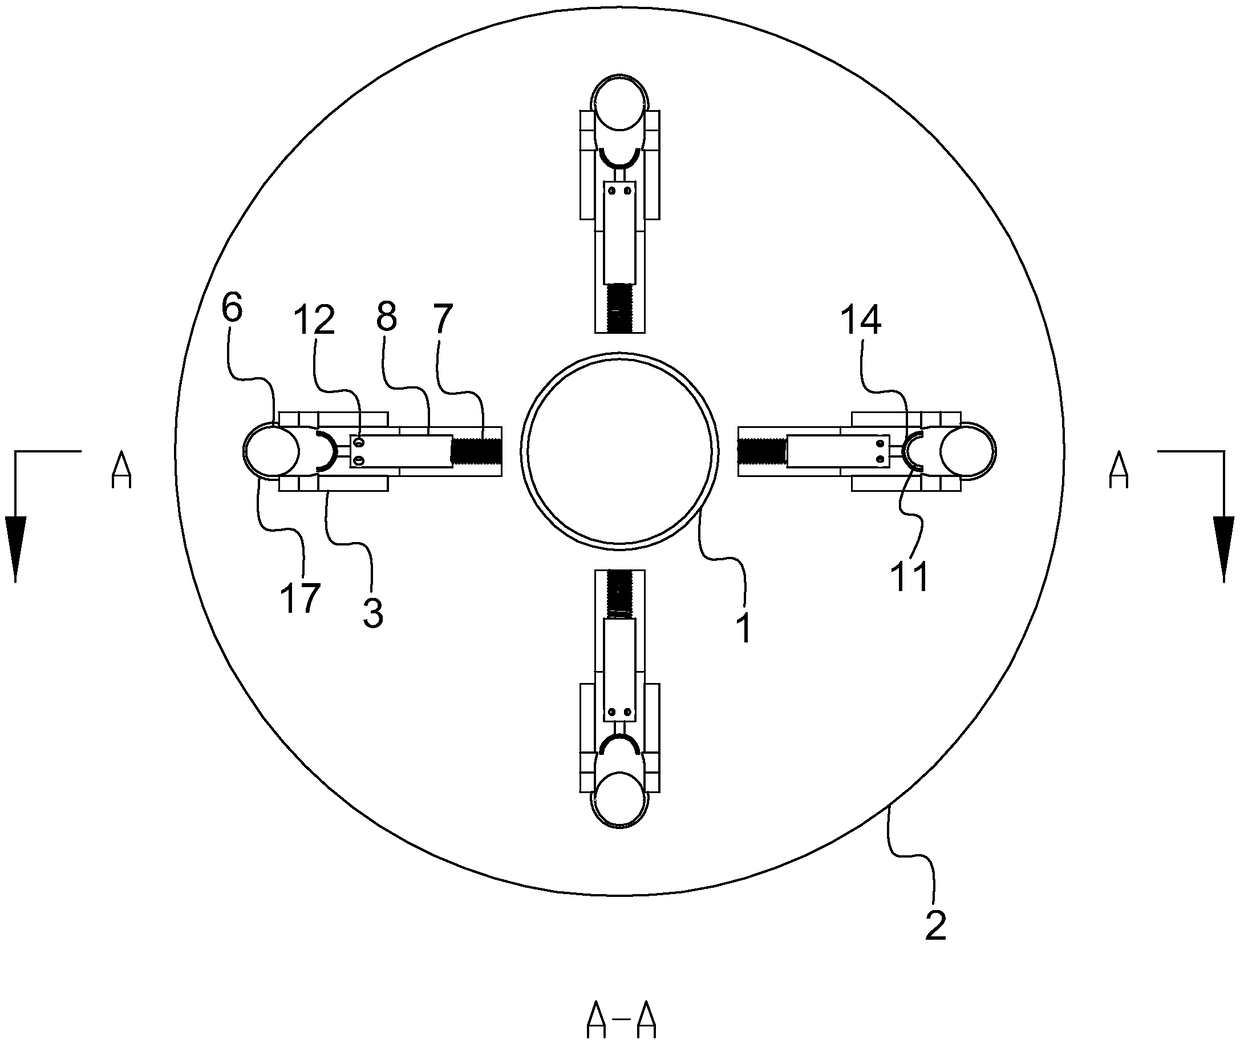 Disc-type scaffold capable of being mounted and dismounted